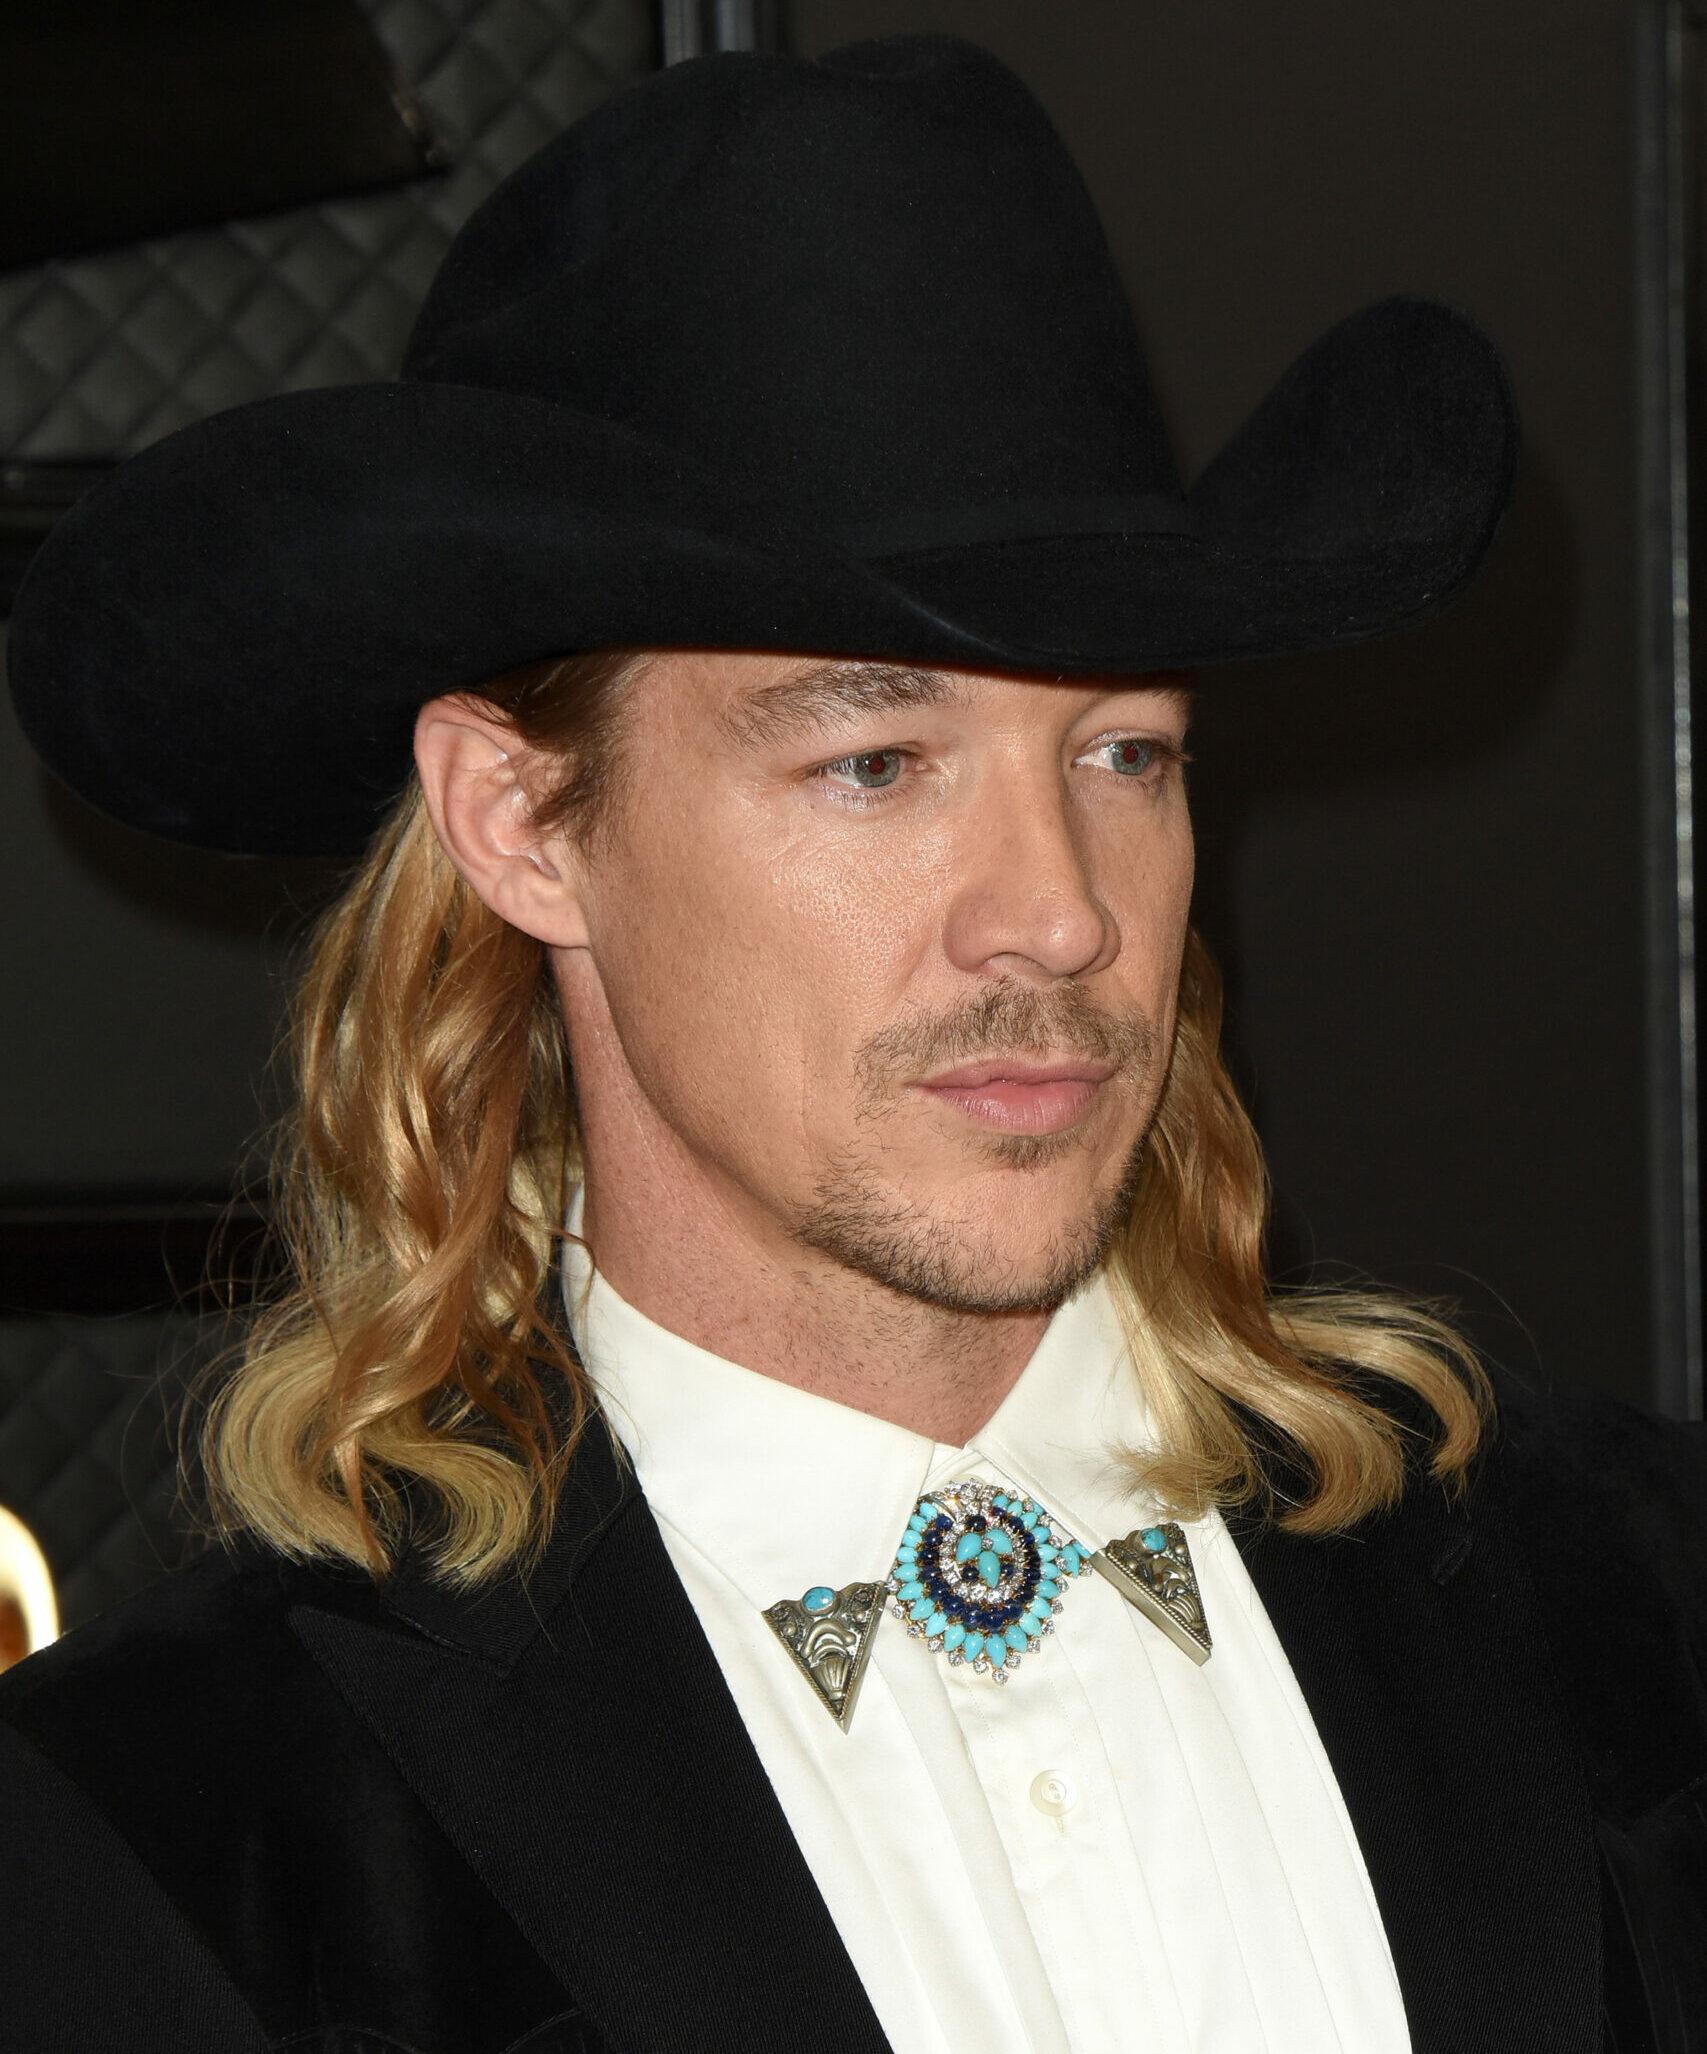 Diplo at the 62nd Grammy Awards at the Staples Center on January 26, 2020 in Los Angeles, CA